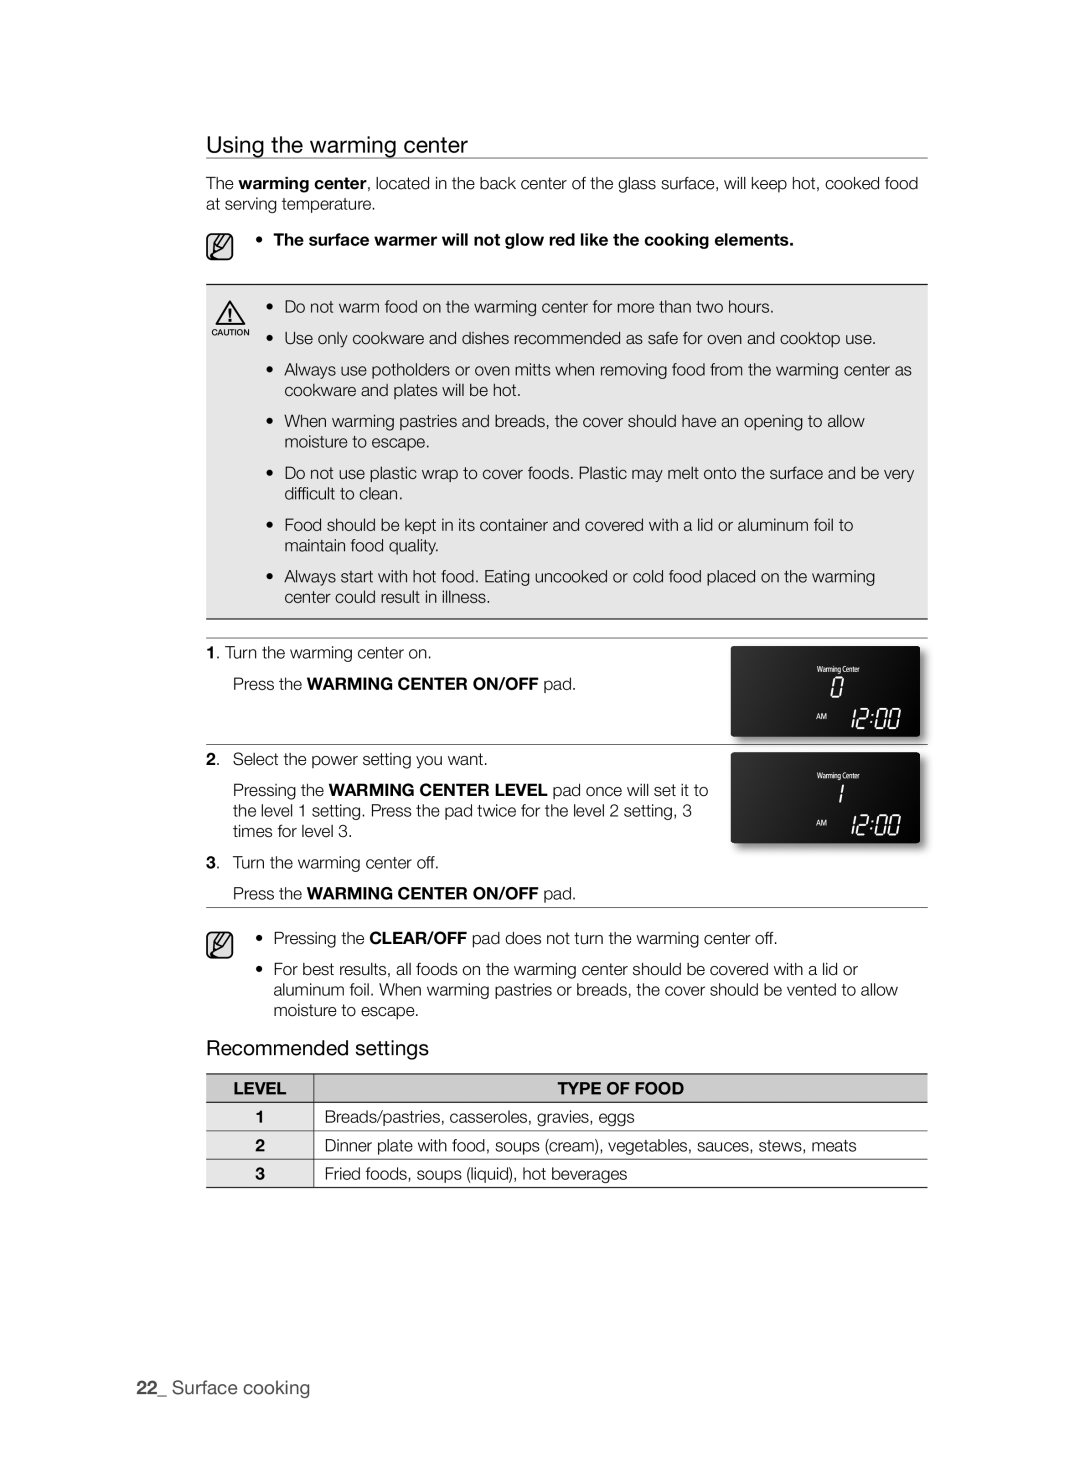 Samsung FE-R700WX, DG68-00294A user manual Using the warming center, Recommended settings, Surface cooking 